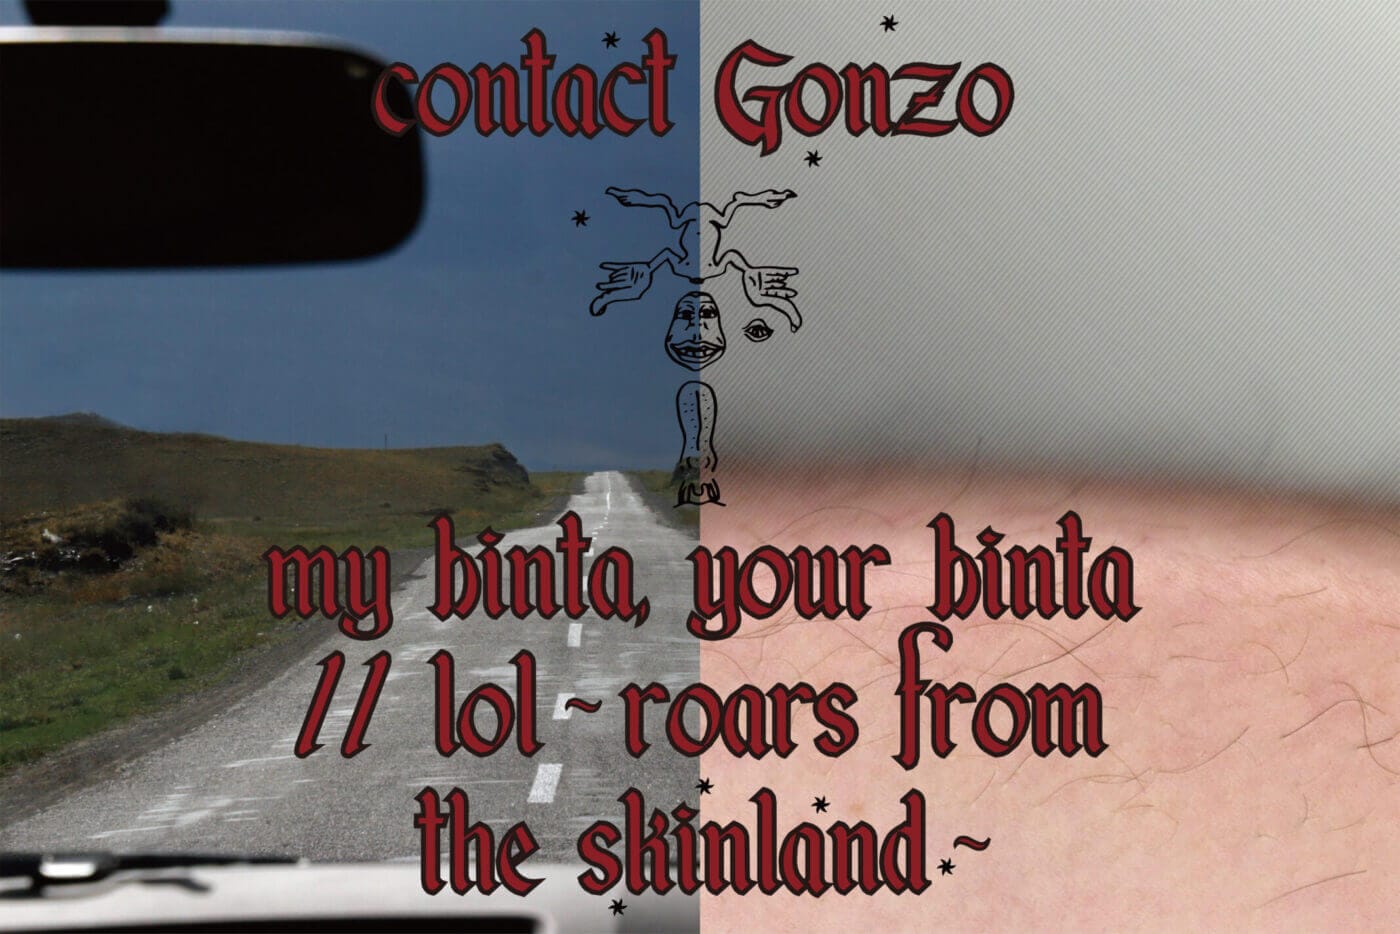 REVIEW｜contact Gonzo パフォーマンス公演「my binta, your binta // lol ~ roars from the skinland ~」